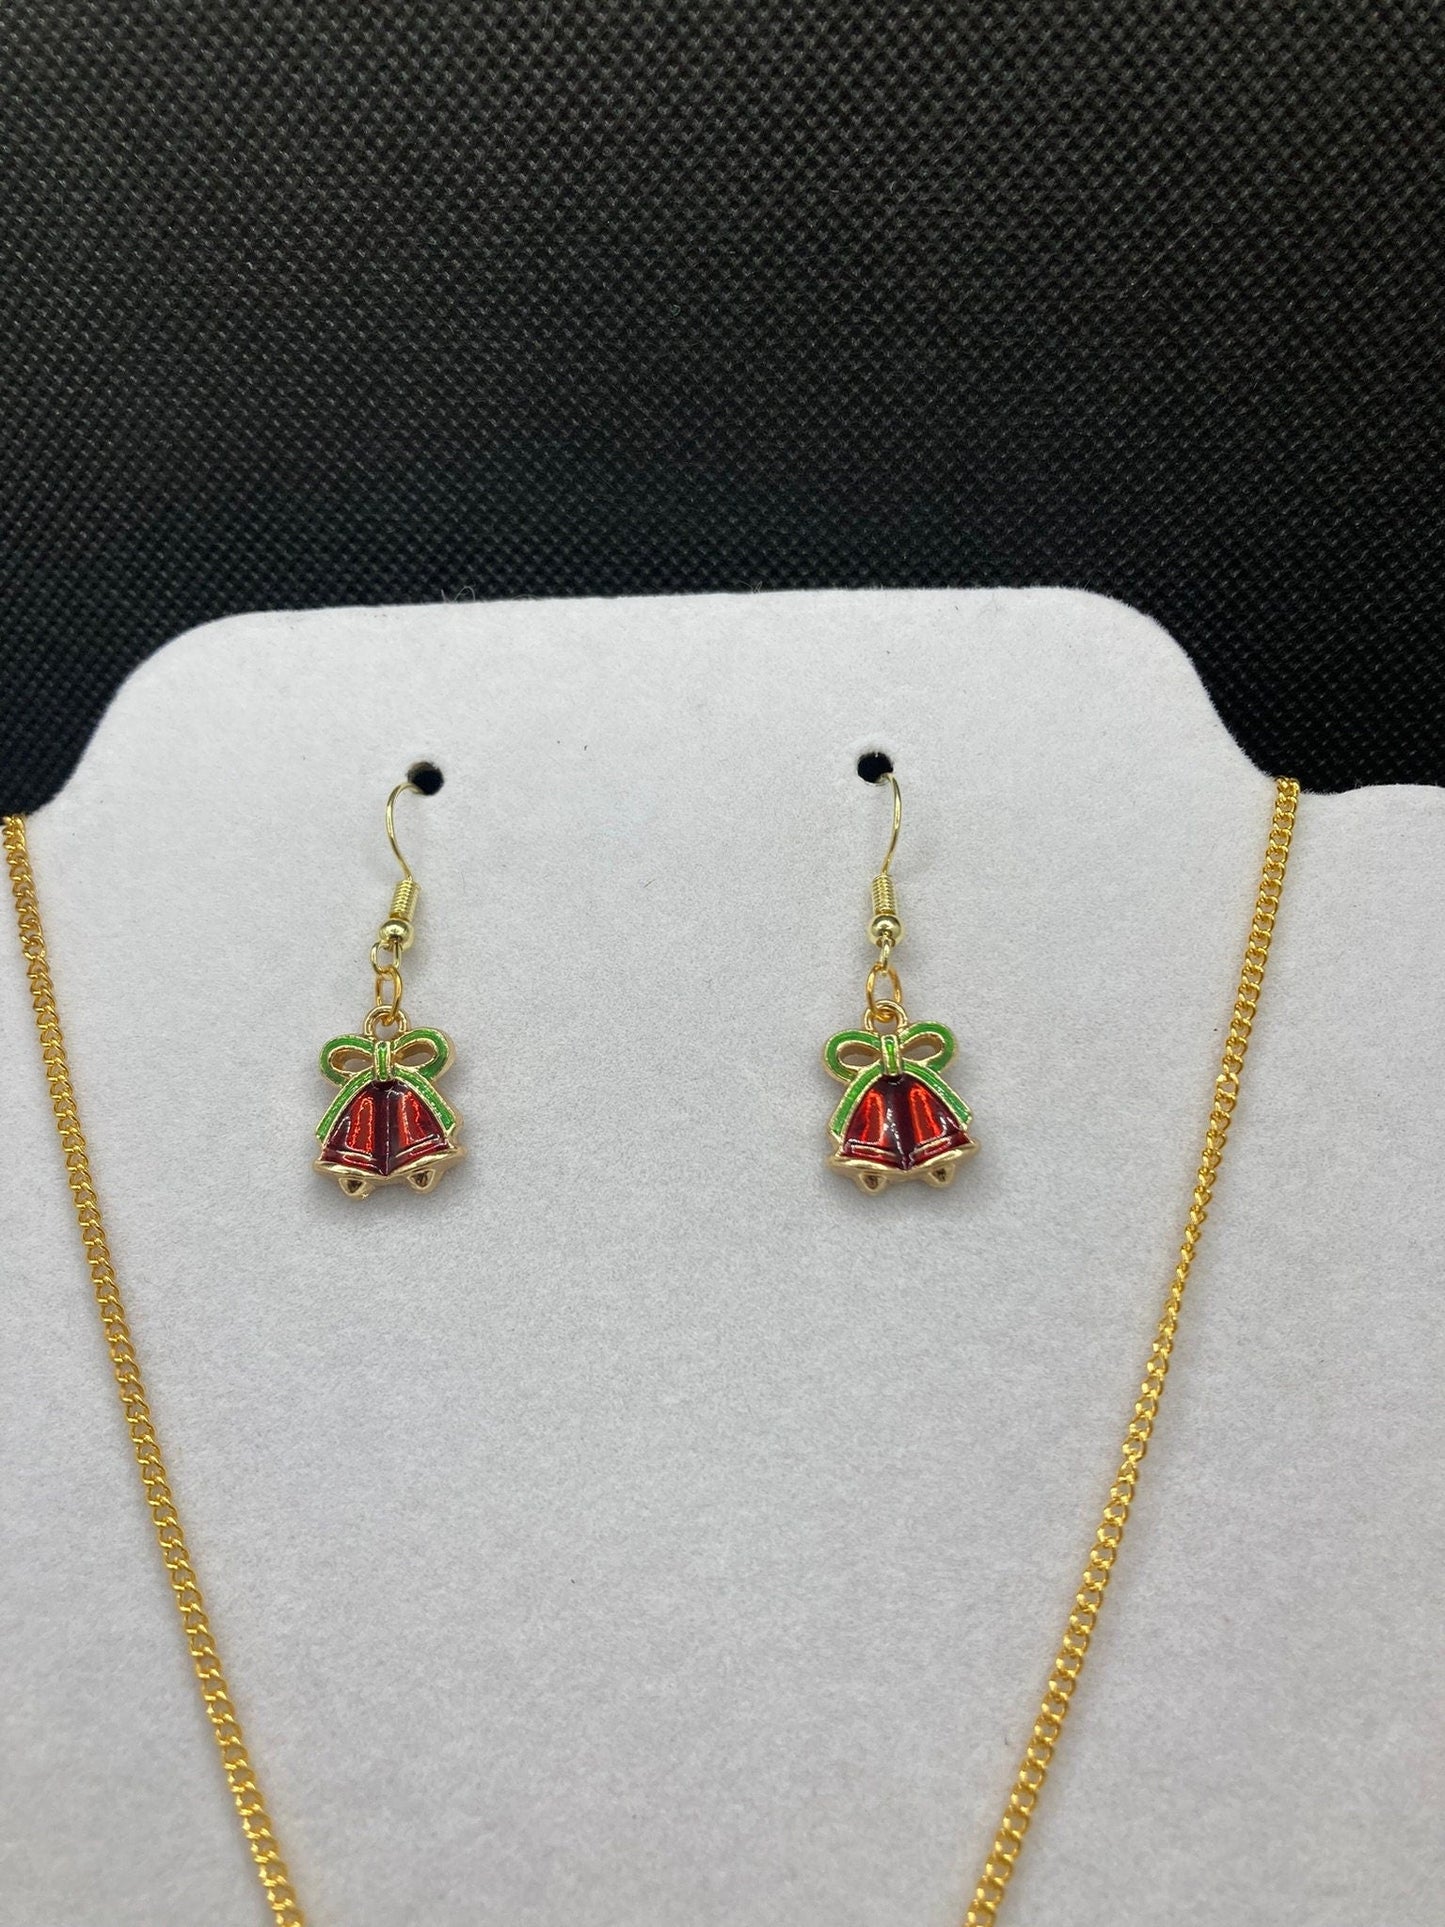 Christmas Necklace and Earring set with Christmas Bells perfect for the Holidays and Gift Giving.